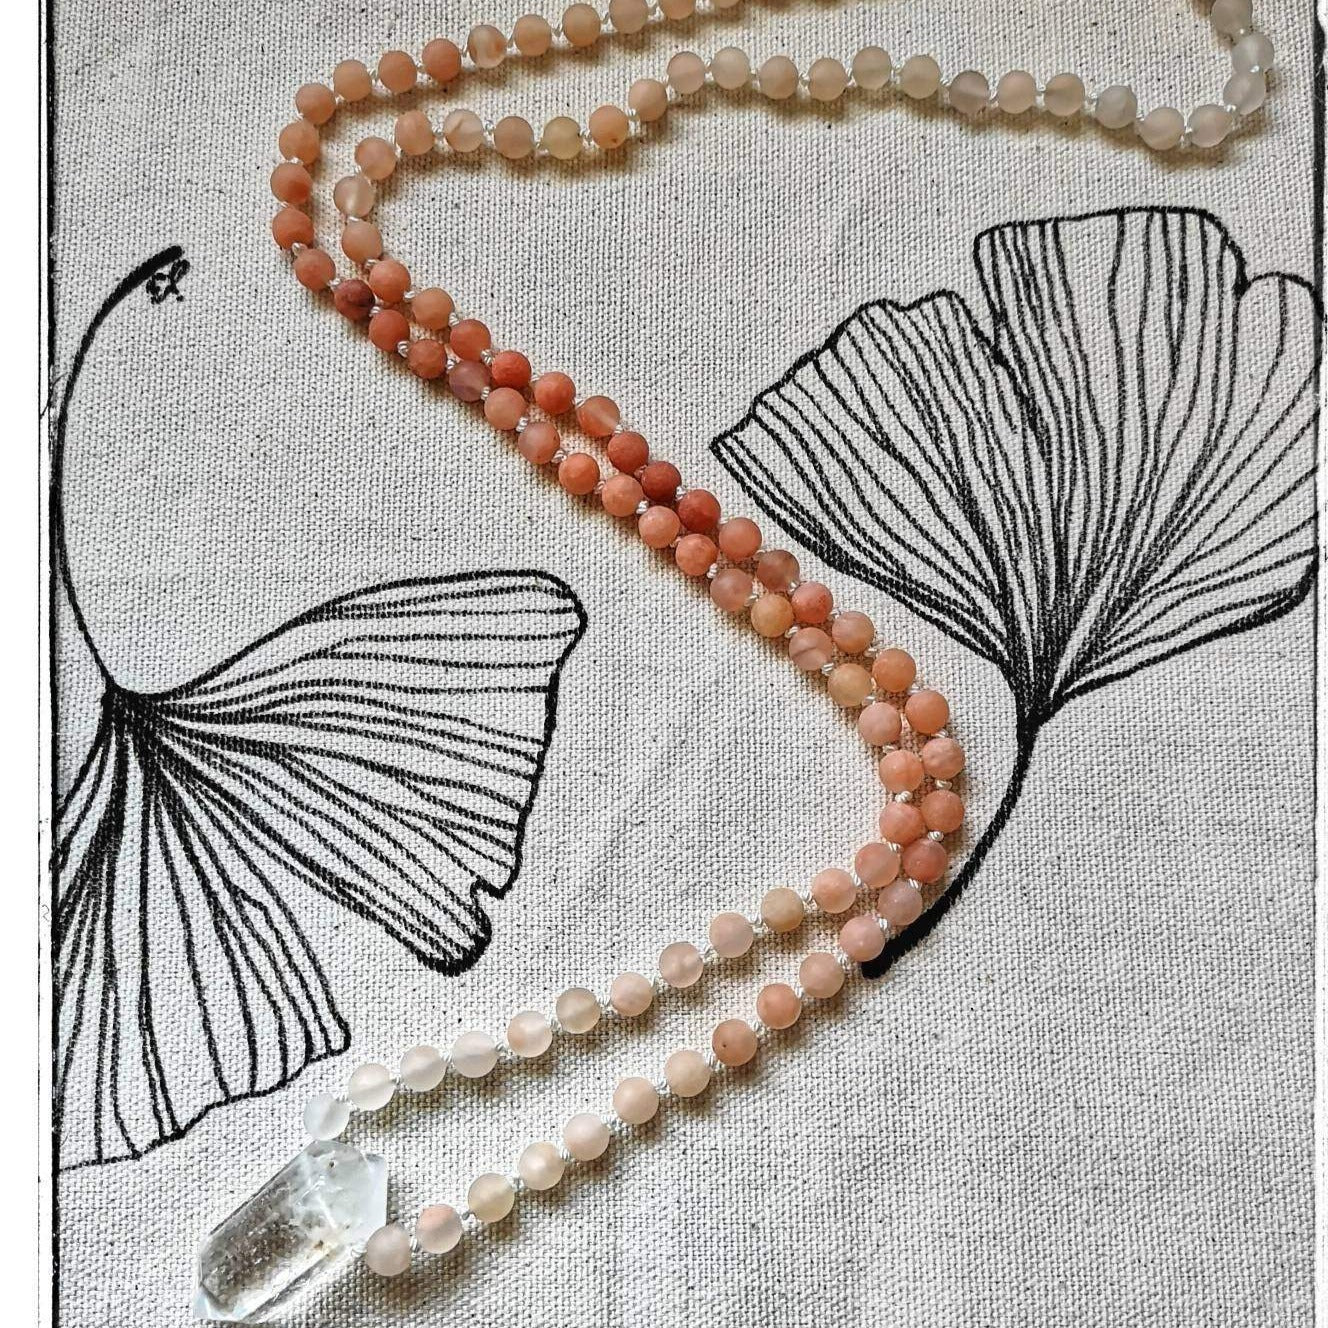 Hand-knotted Peach Ombre Mala Necklace